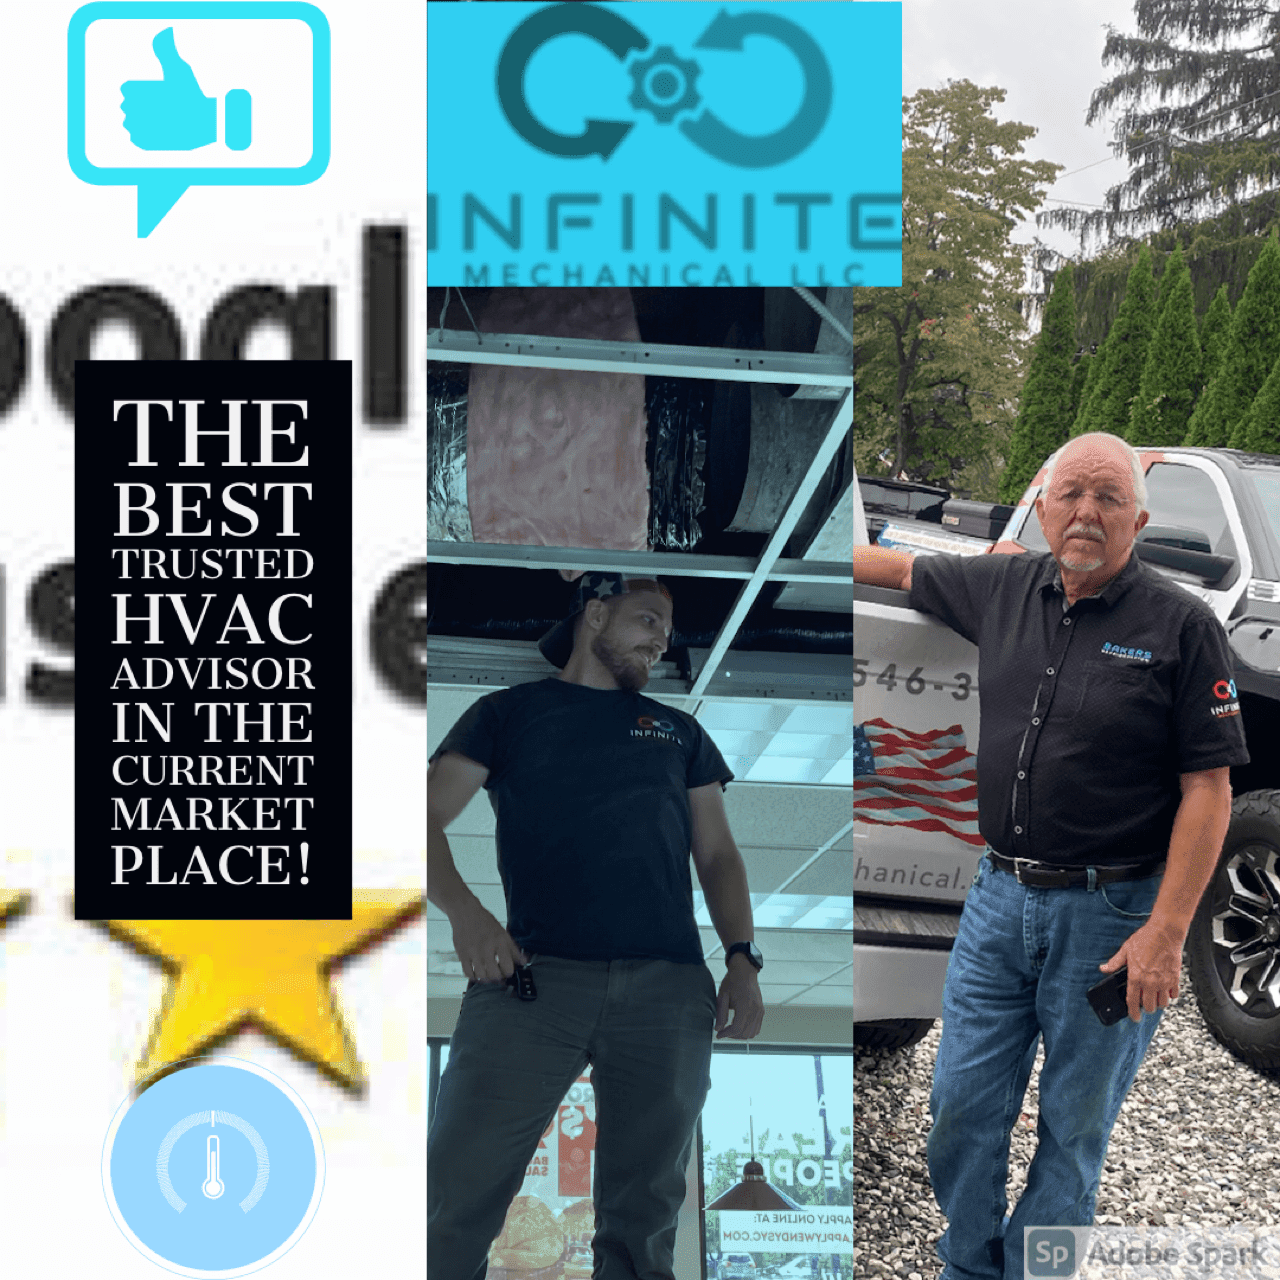 the-best-trusted-HVAC professional expert